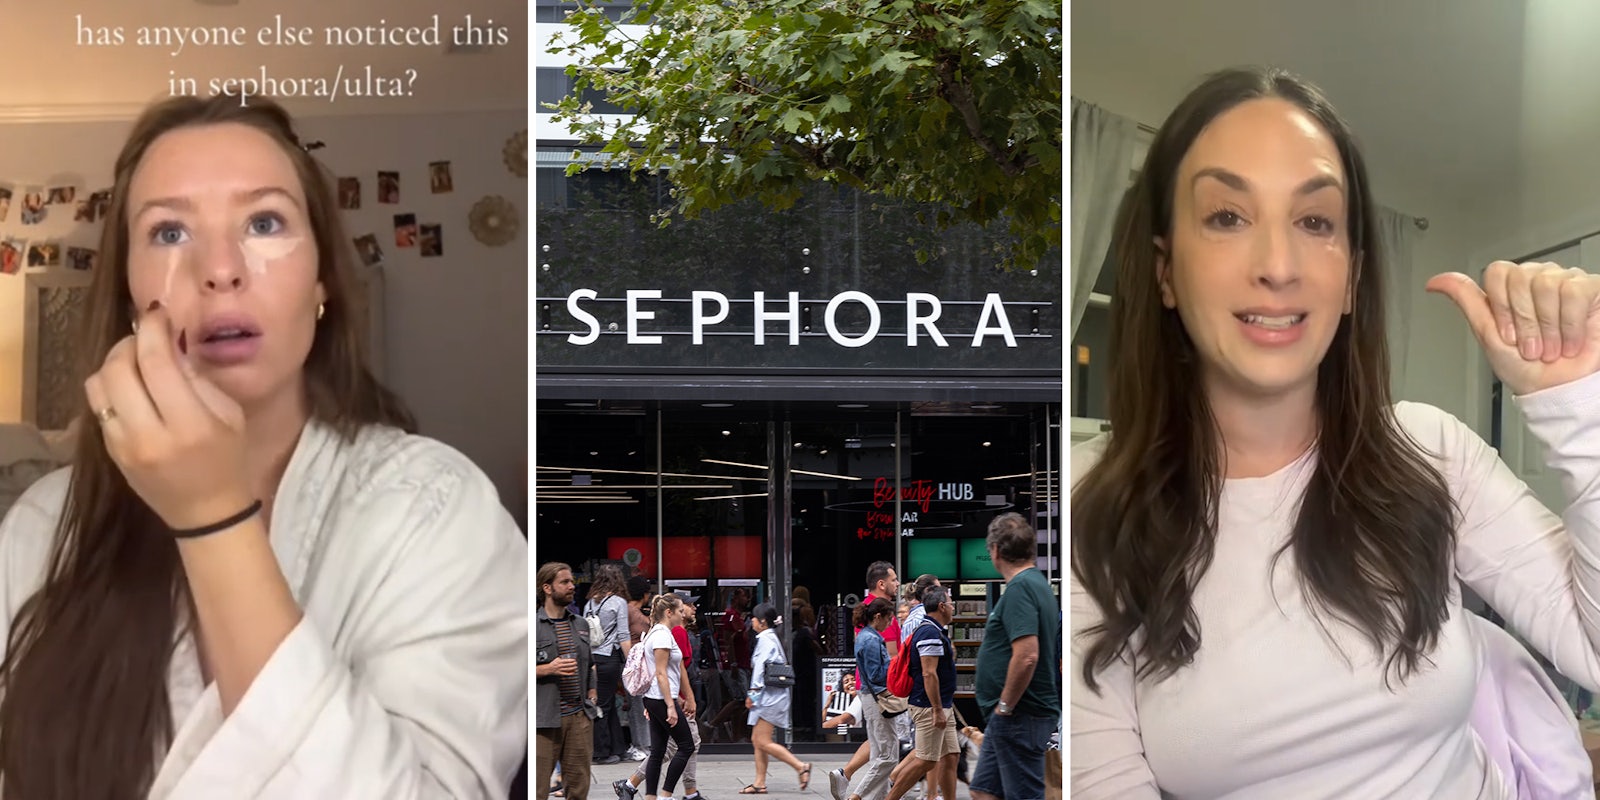 Customer demands Sephora implement an age policy after her experience with a 10-year-old customer